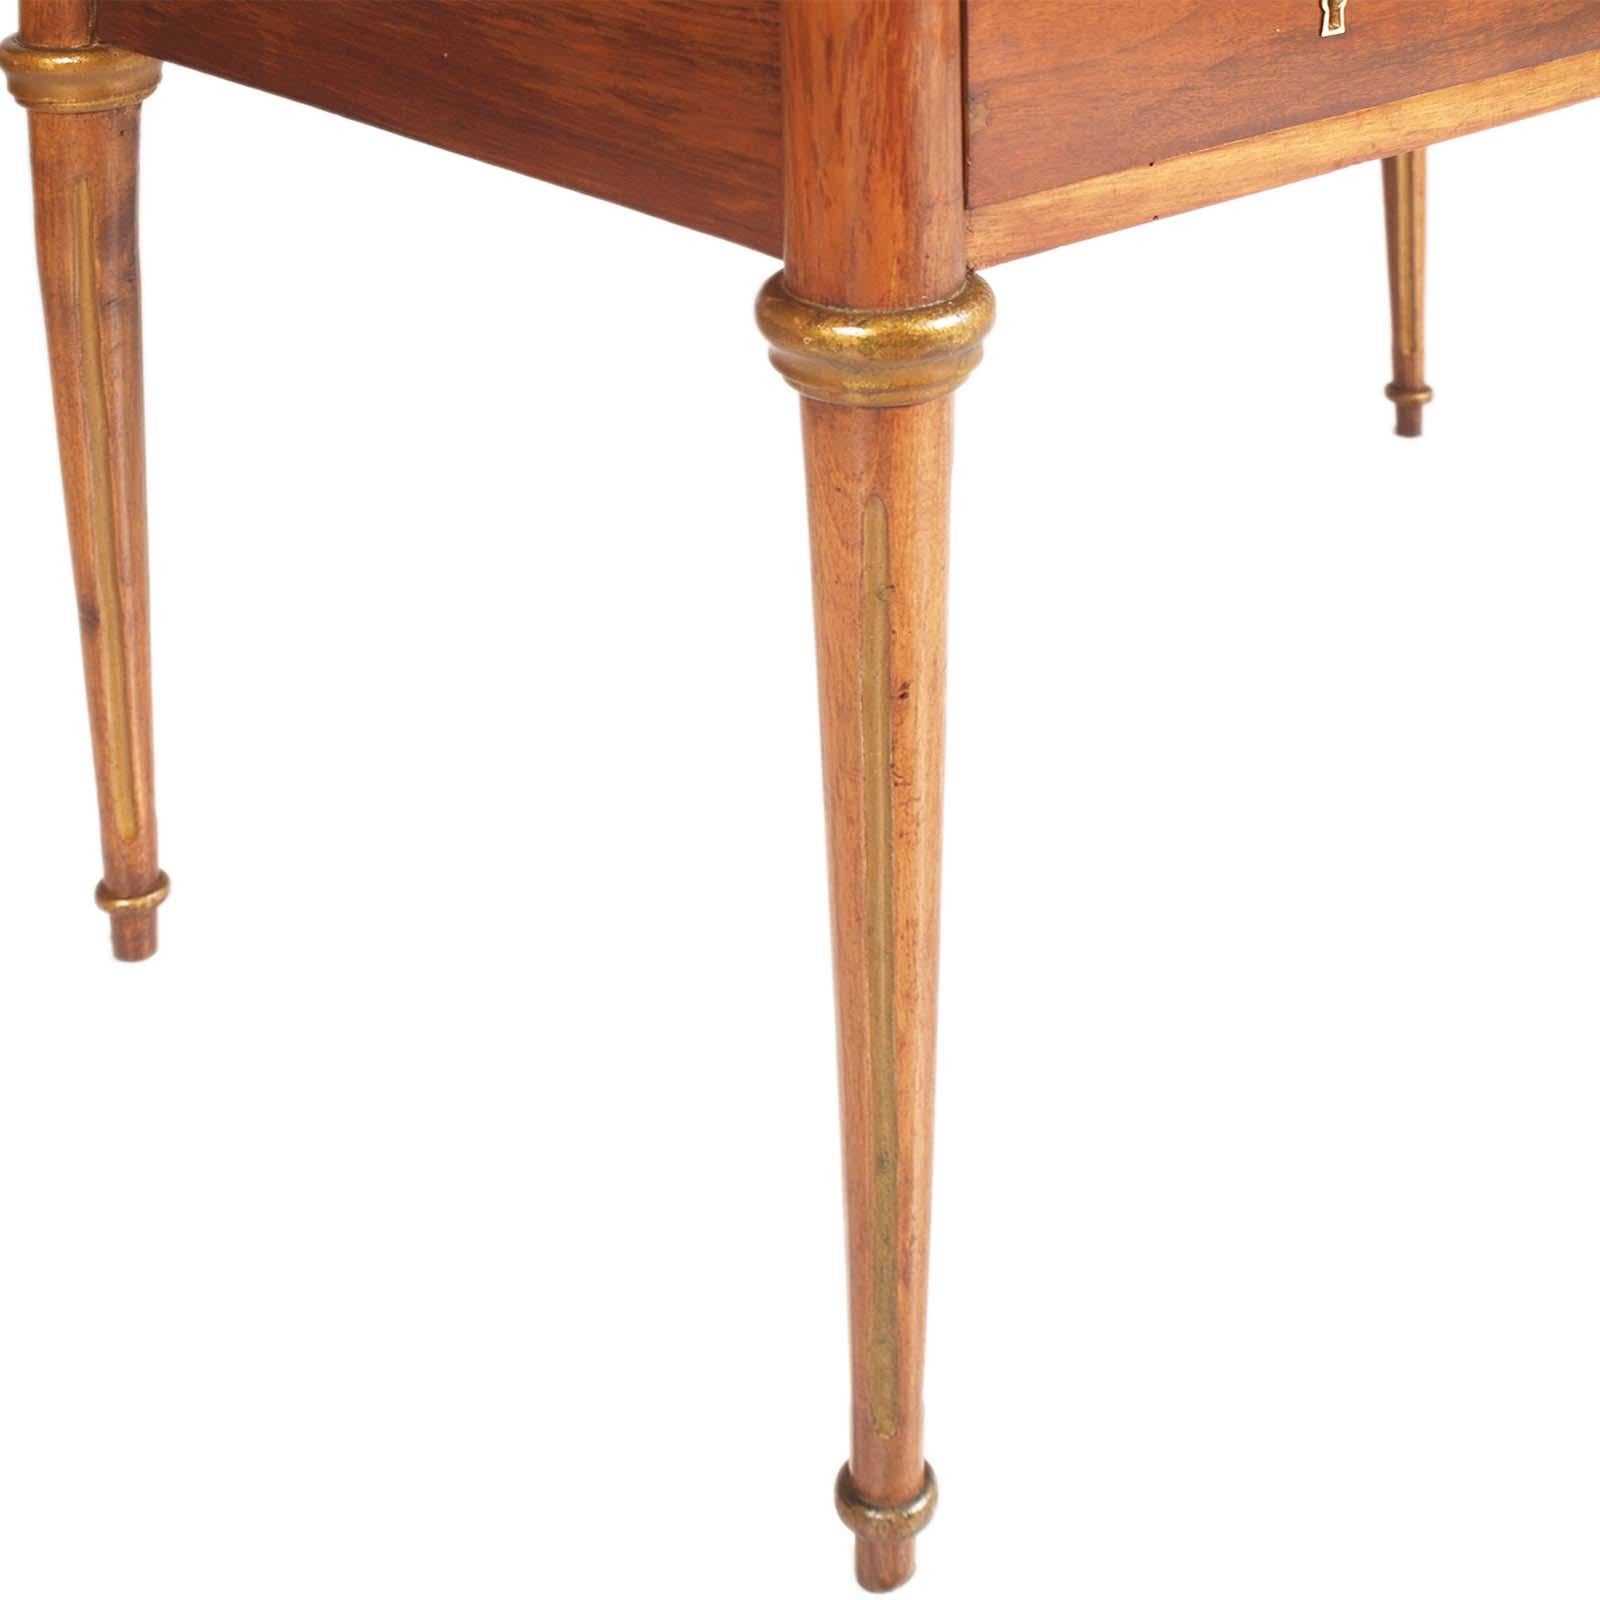 Italian Early 20th Century Writing Desk in Walnut with Inlay by Meroni & Fossati For Sale